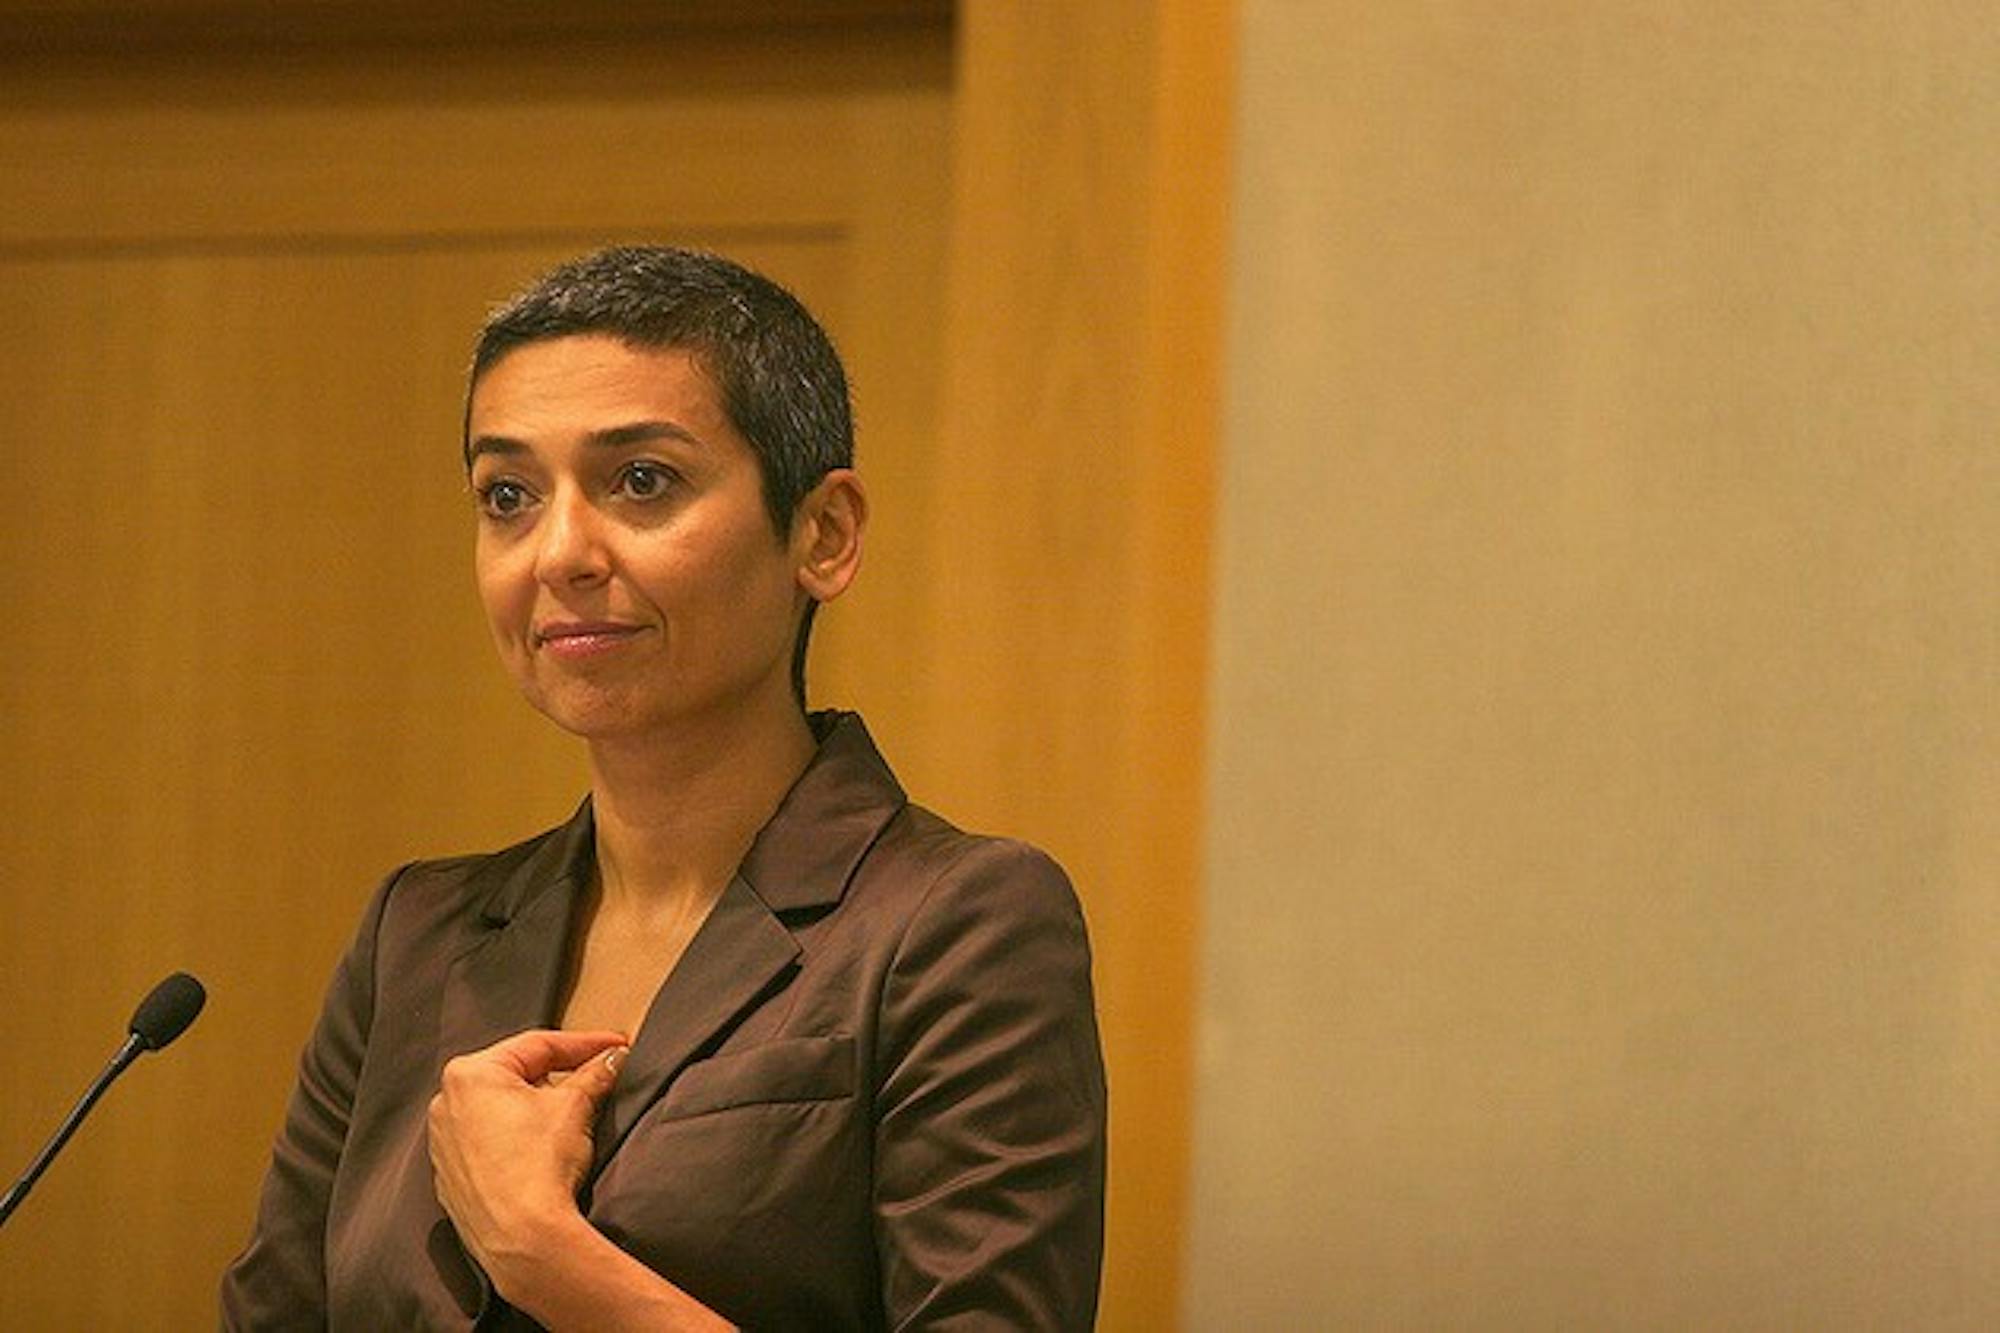 Women's rights activist Zainab Salbi criticized the United States for the Iraq War's detrimental effects on Iraqi women in a Thursday lecture.